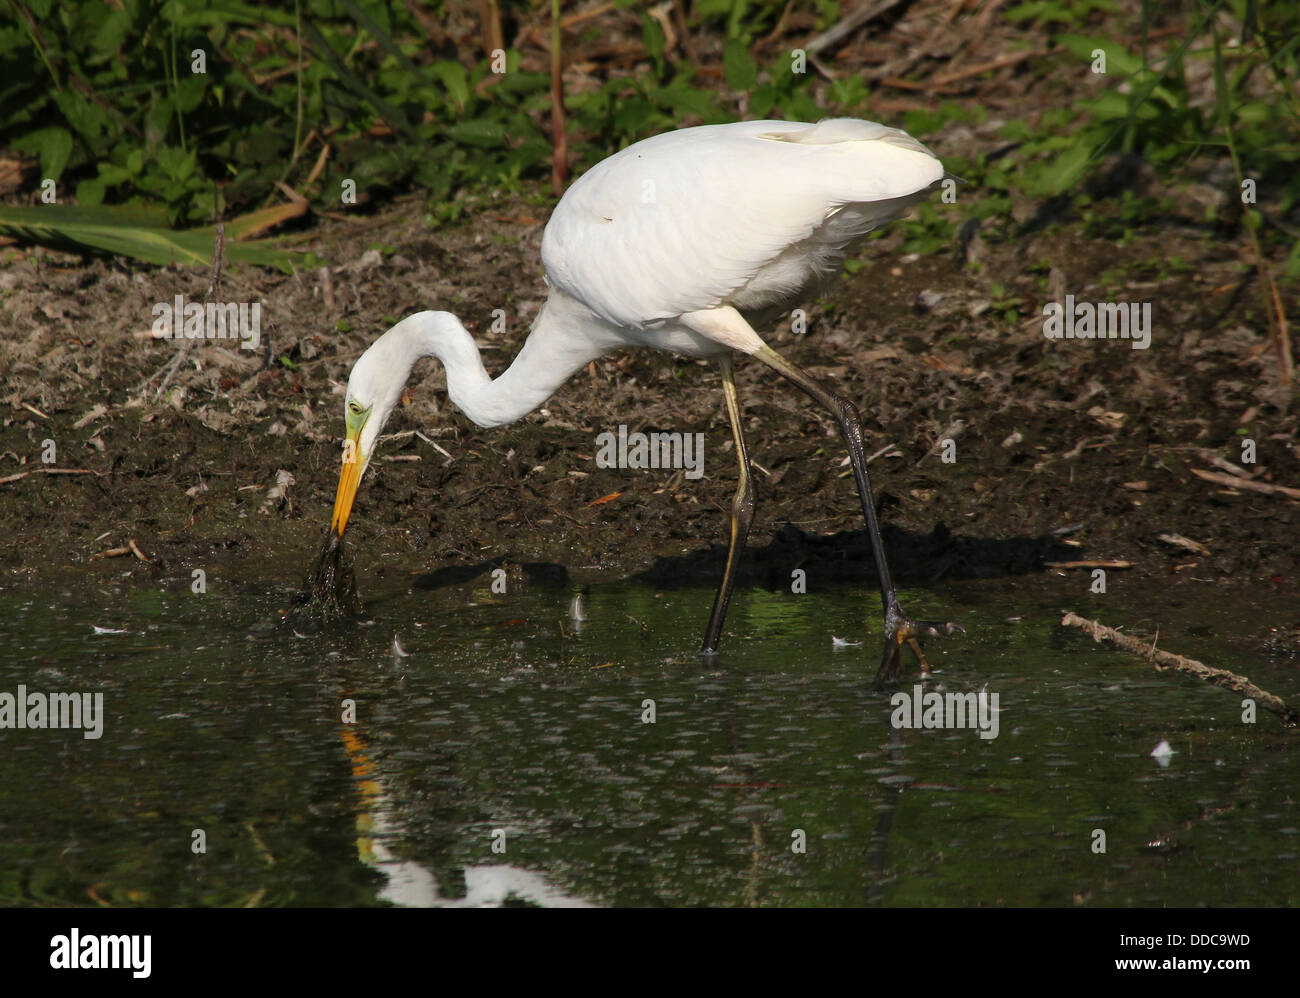 Detailed close-up of a Great White Egret (Ardea Alba) hunting for fish in marshy wetlands (nearly 100 Egret images in all) Stock Photo